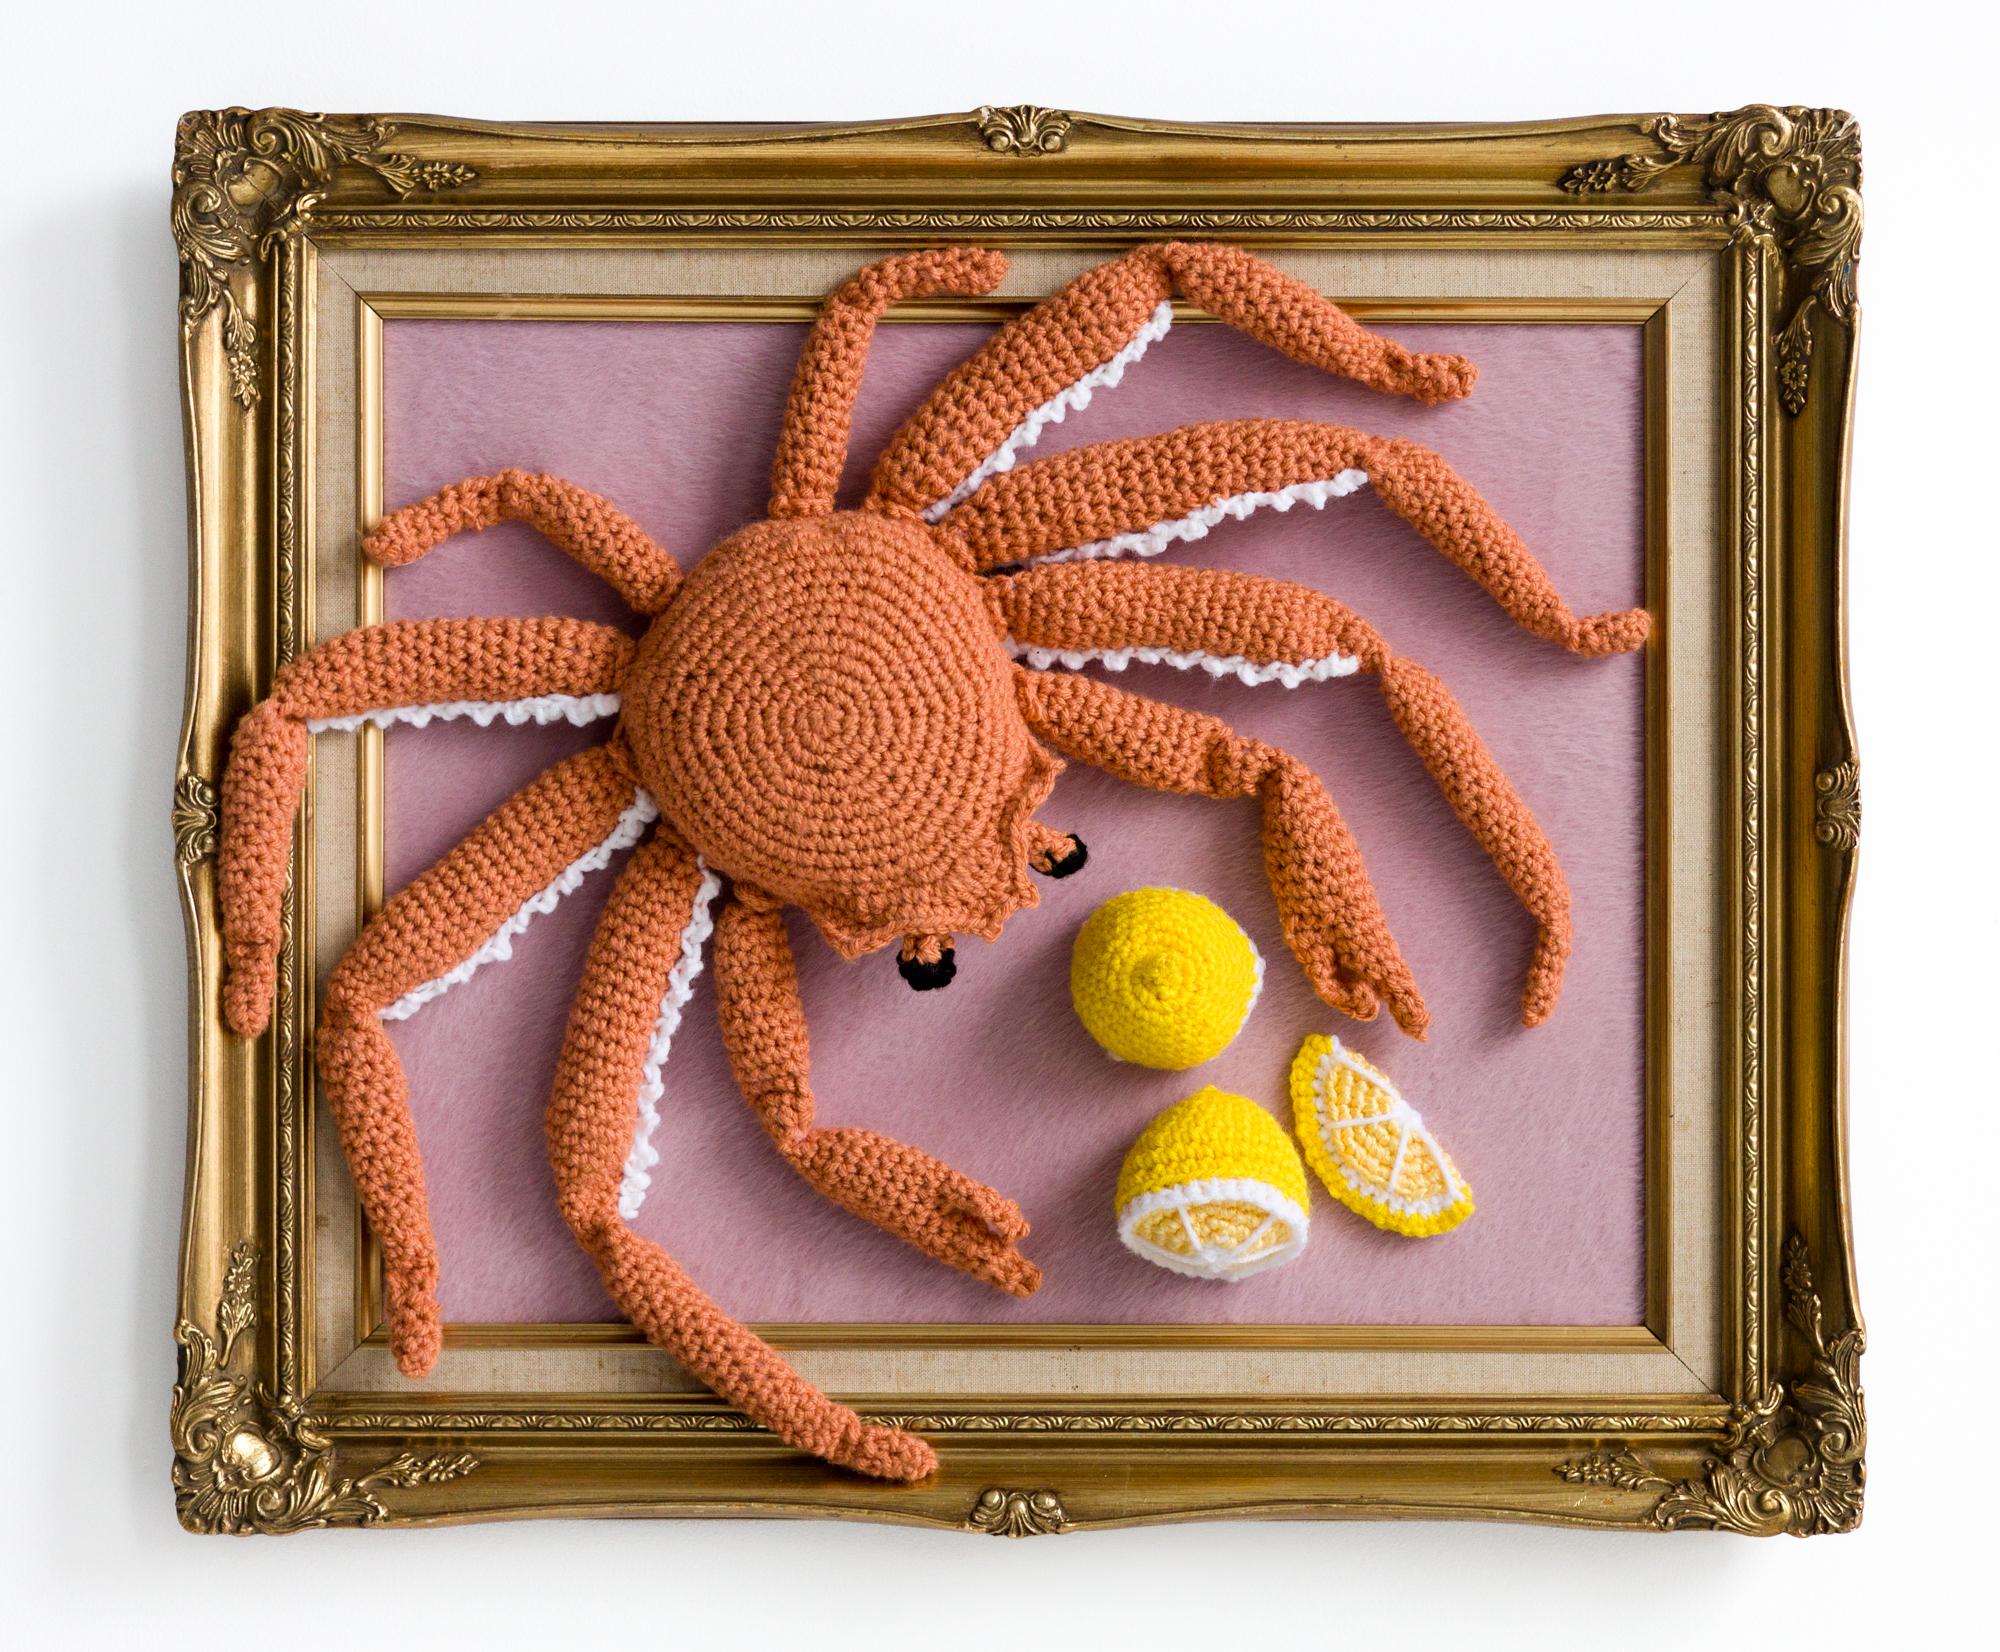 "XL Snow Crab", Seafood, Crochet Acrylic in Vintage Frame, Animalia - Sculpture by Nicole Nikolich, Lace in the Moon